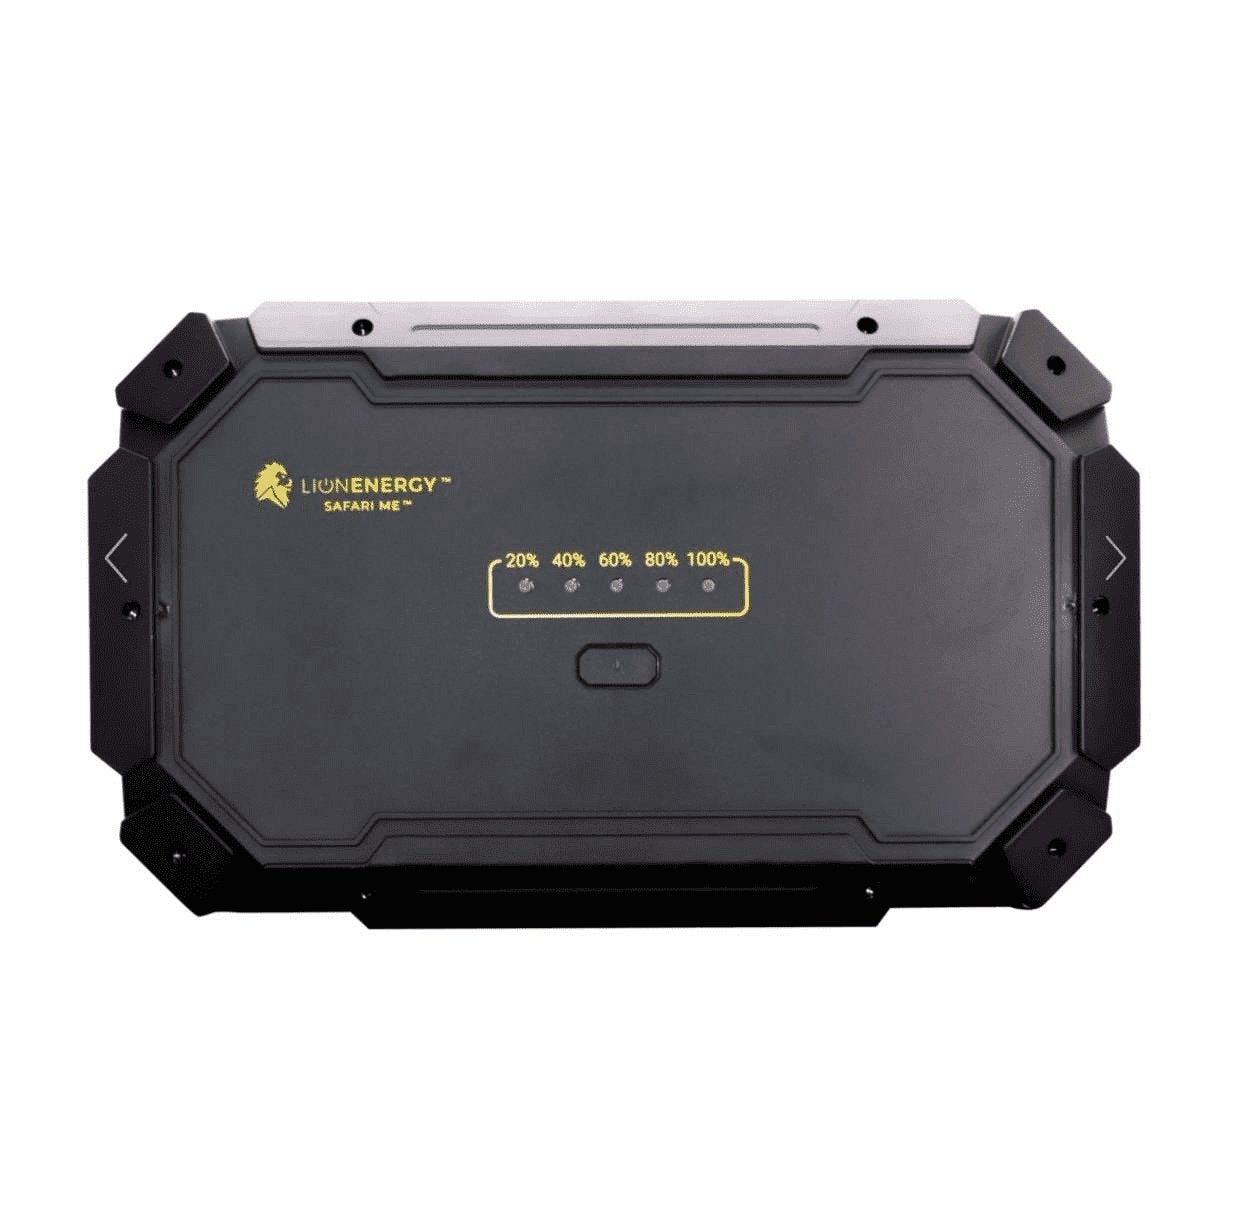 Lion 2048 Wh Lithium Iron Phosphate Battery Expansion for Safari ME-EcoPowerit